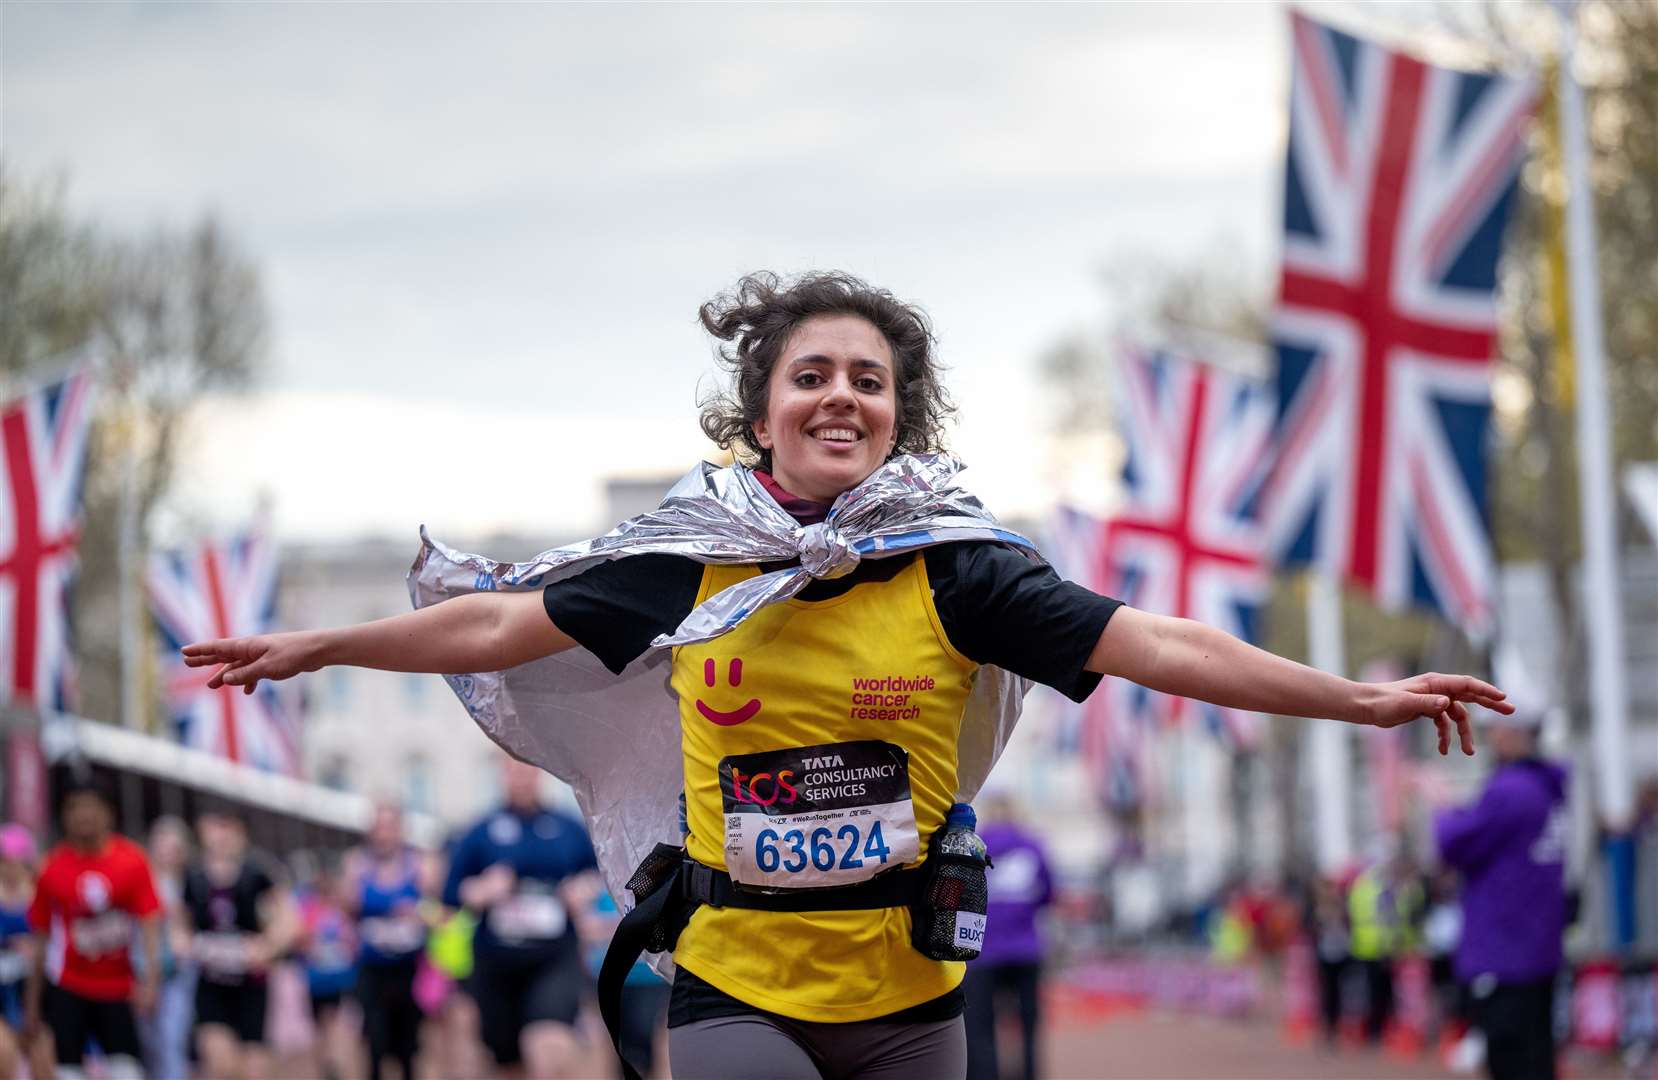 The ballot for next year’s race opens the day before the 2024 marathon. Image credit: TCS London Marathon.